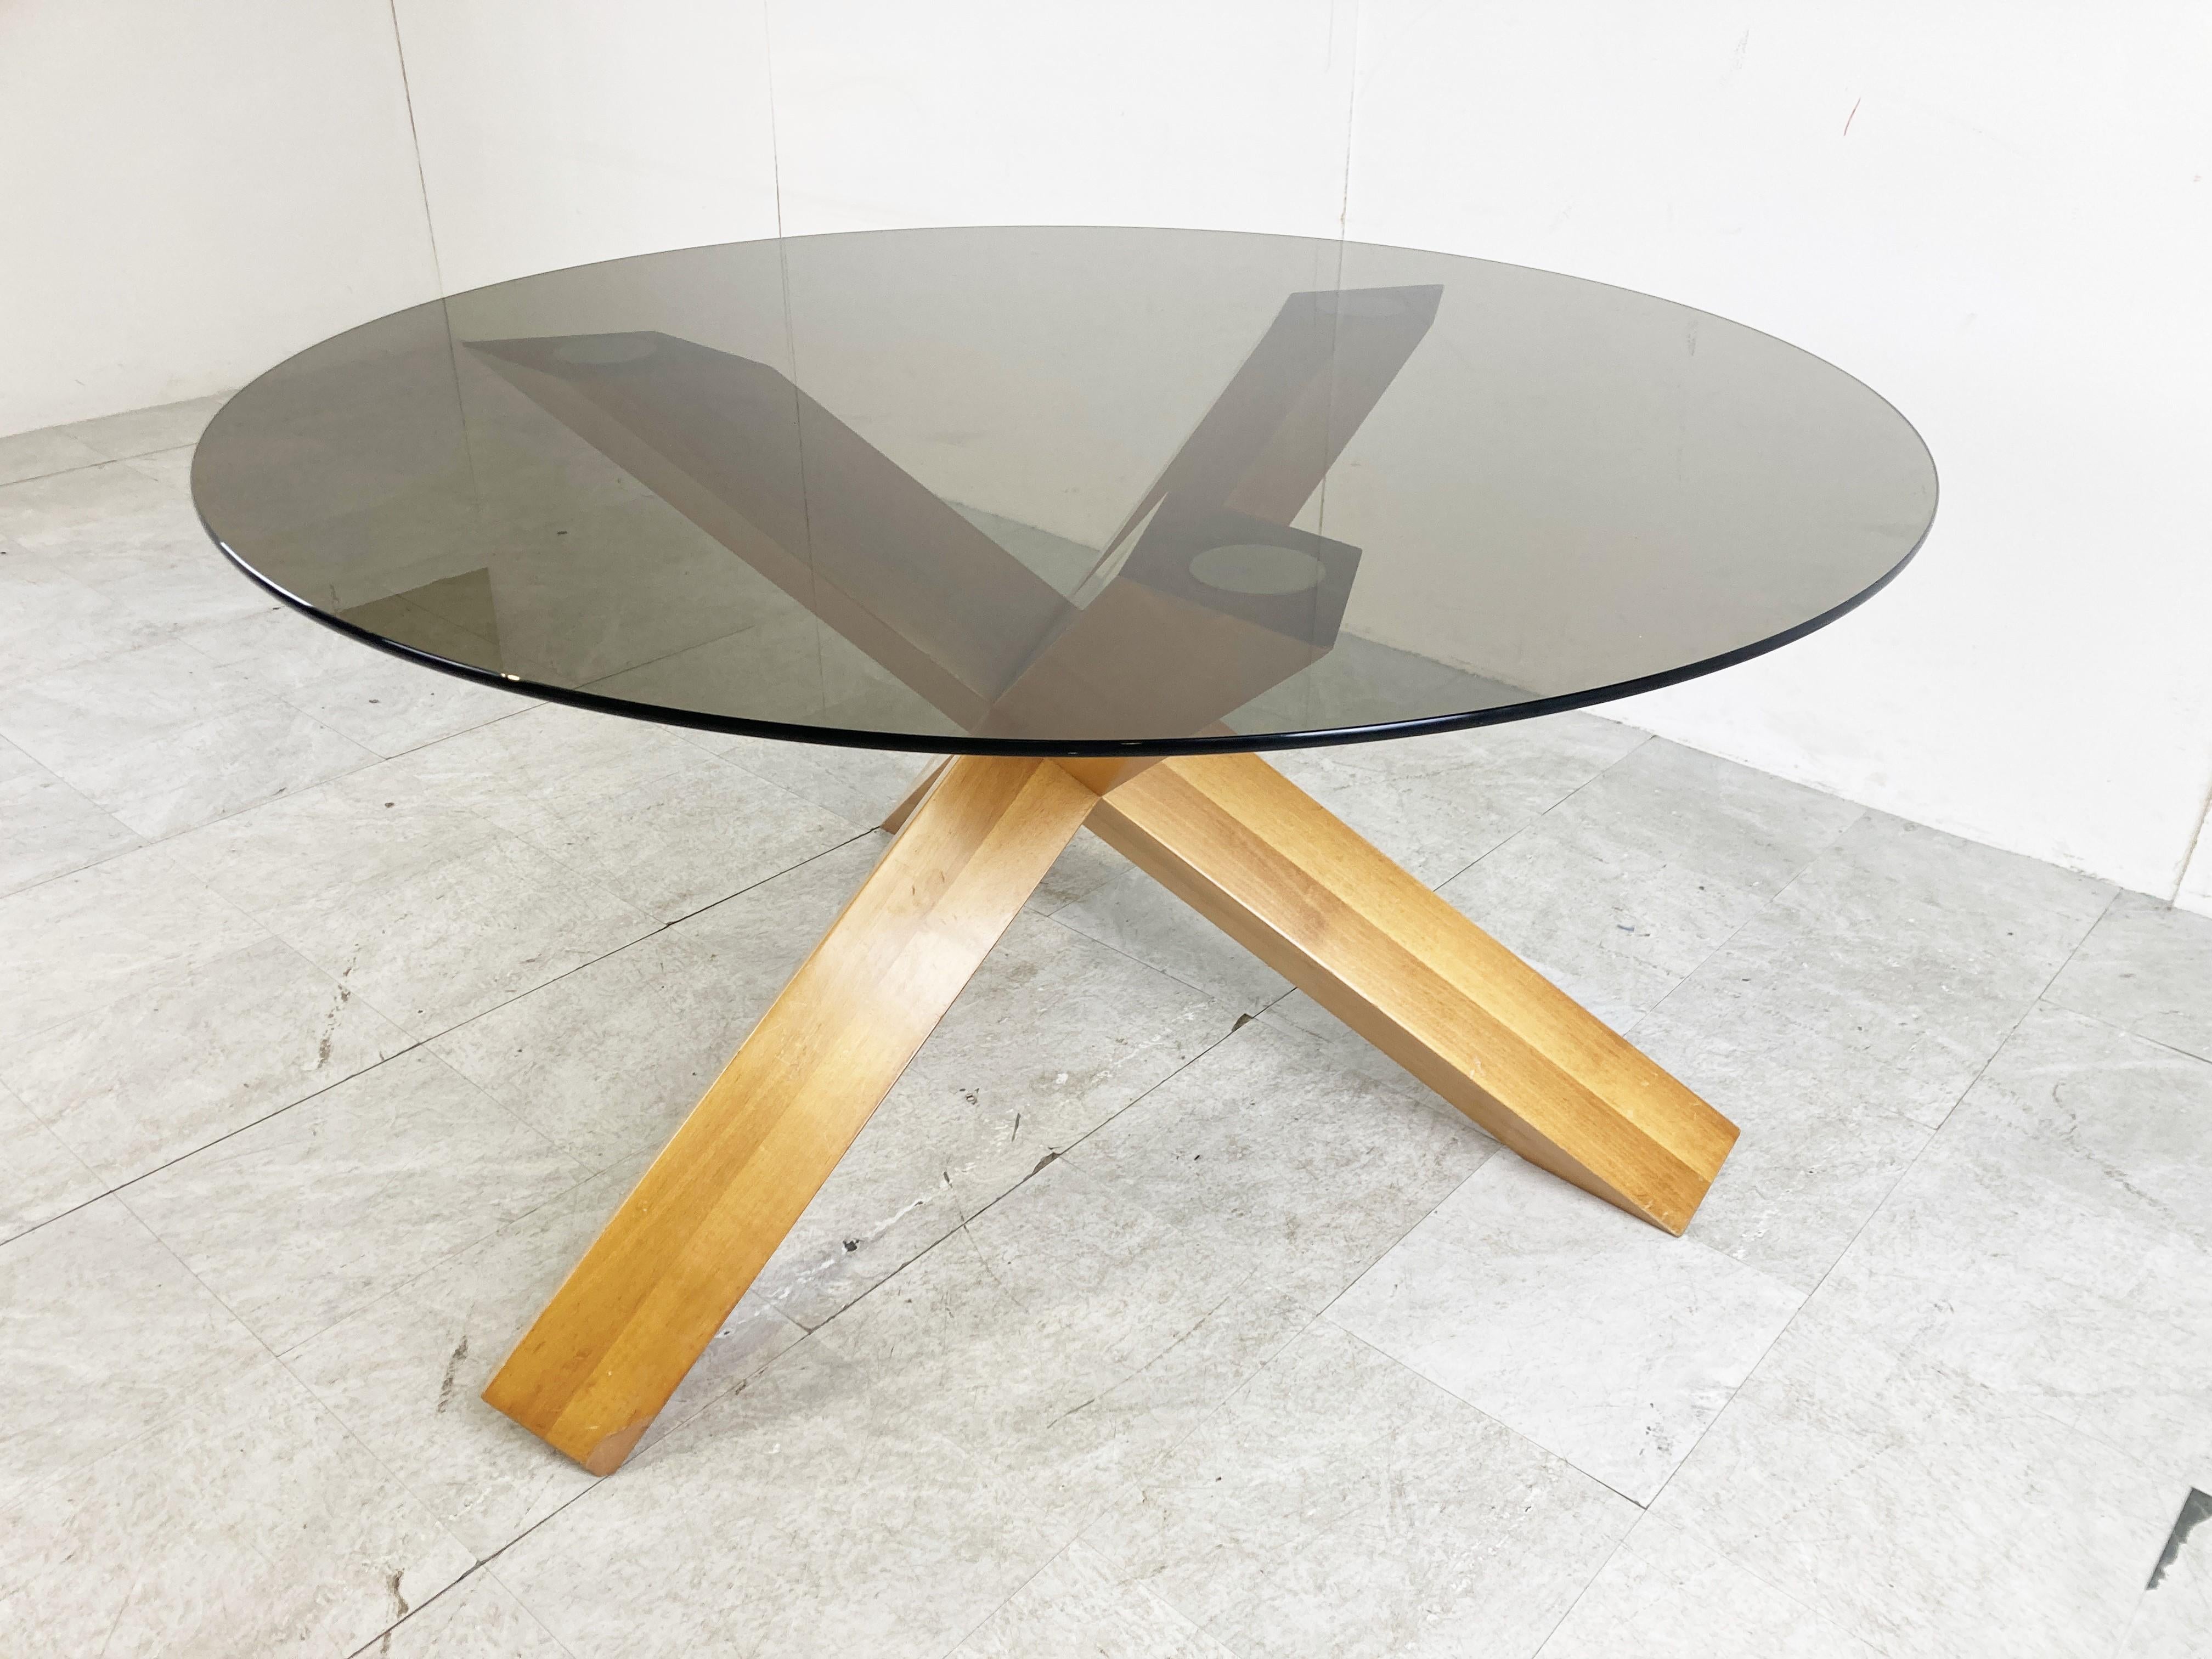 Midcentury ash wood dining table by Mario Bellini for Cassina.

The table has a striking tripod base made from solid ash wood and a smoked glass table top.

Design Classic and produced by Cassina, this is an early seventies production.